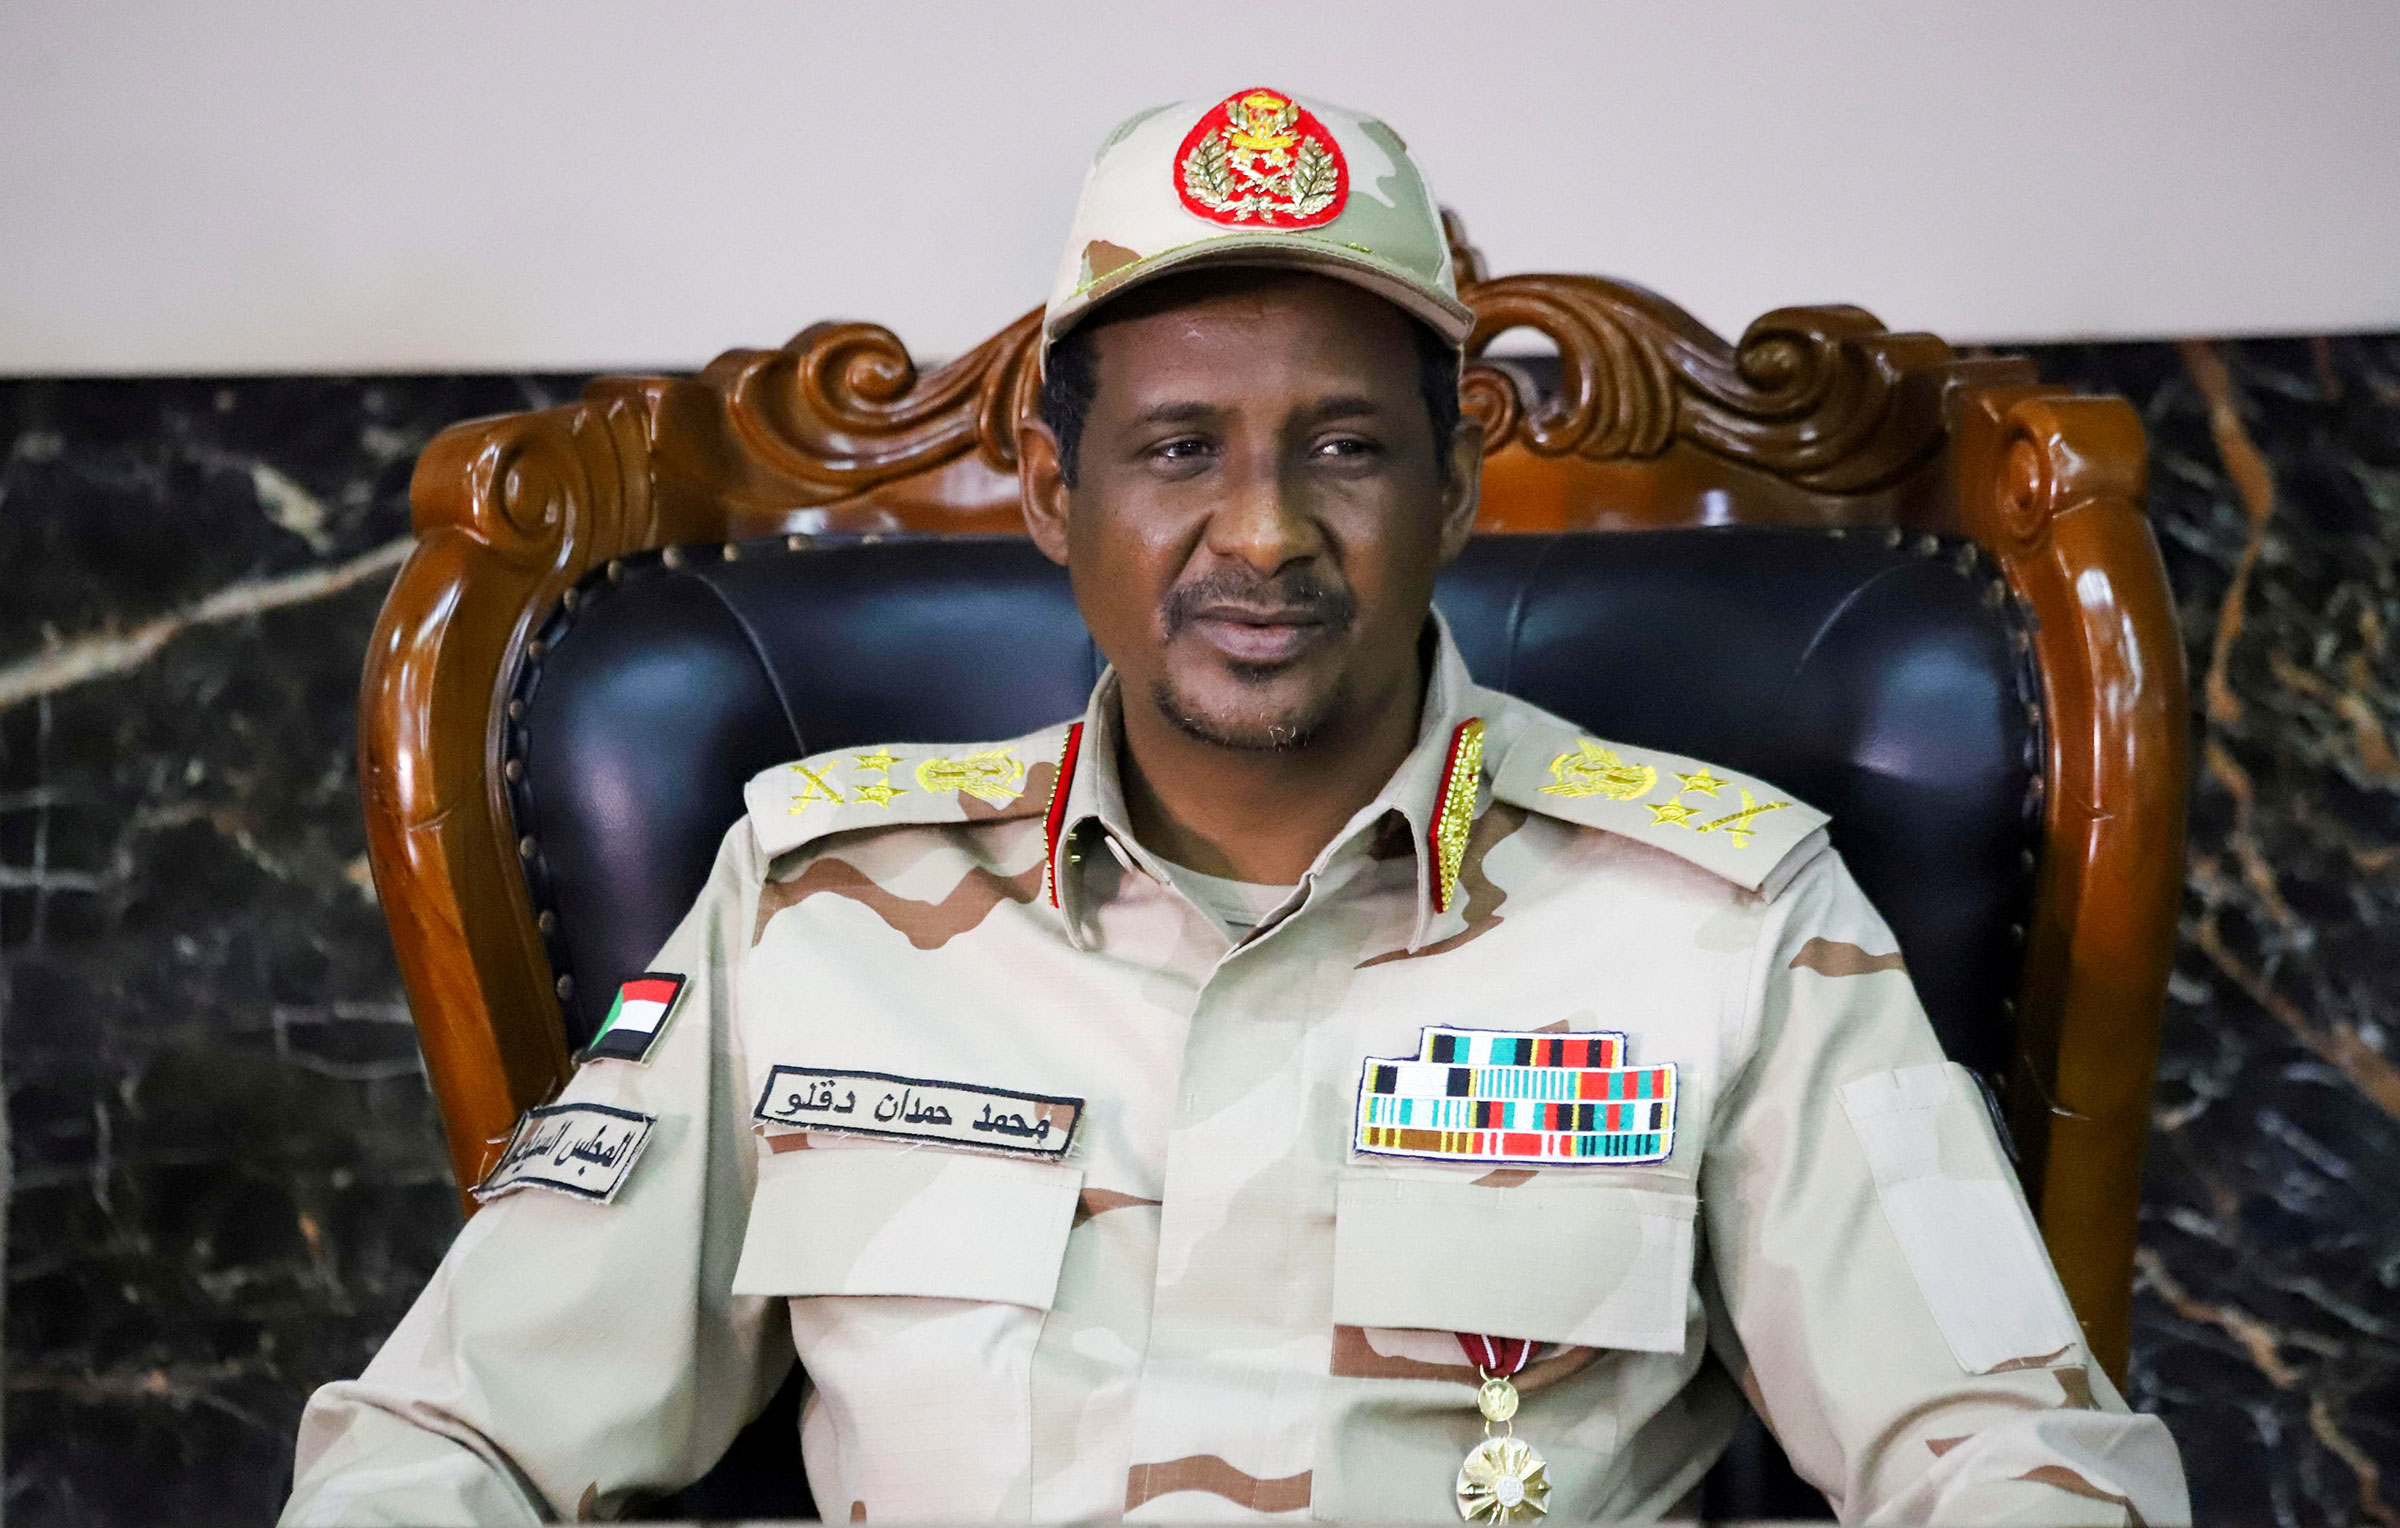 General Mohamed Hamdan Dagalo attends the signing ceremony of the agreement on peace and ceasefire in Juba, South Sudan on Oct. 21, 2019. (Samir Bol—Reuters)